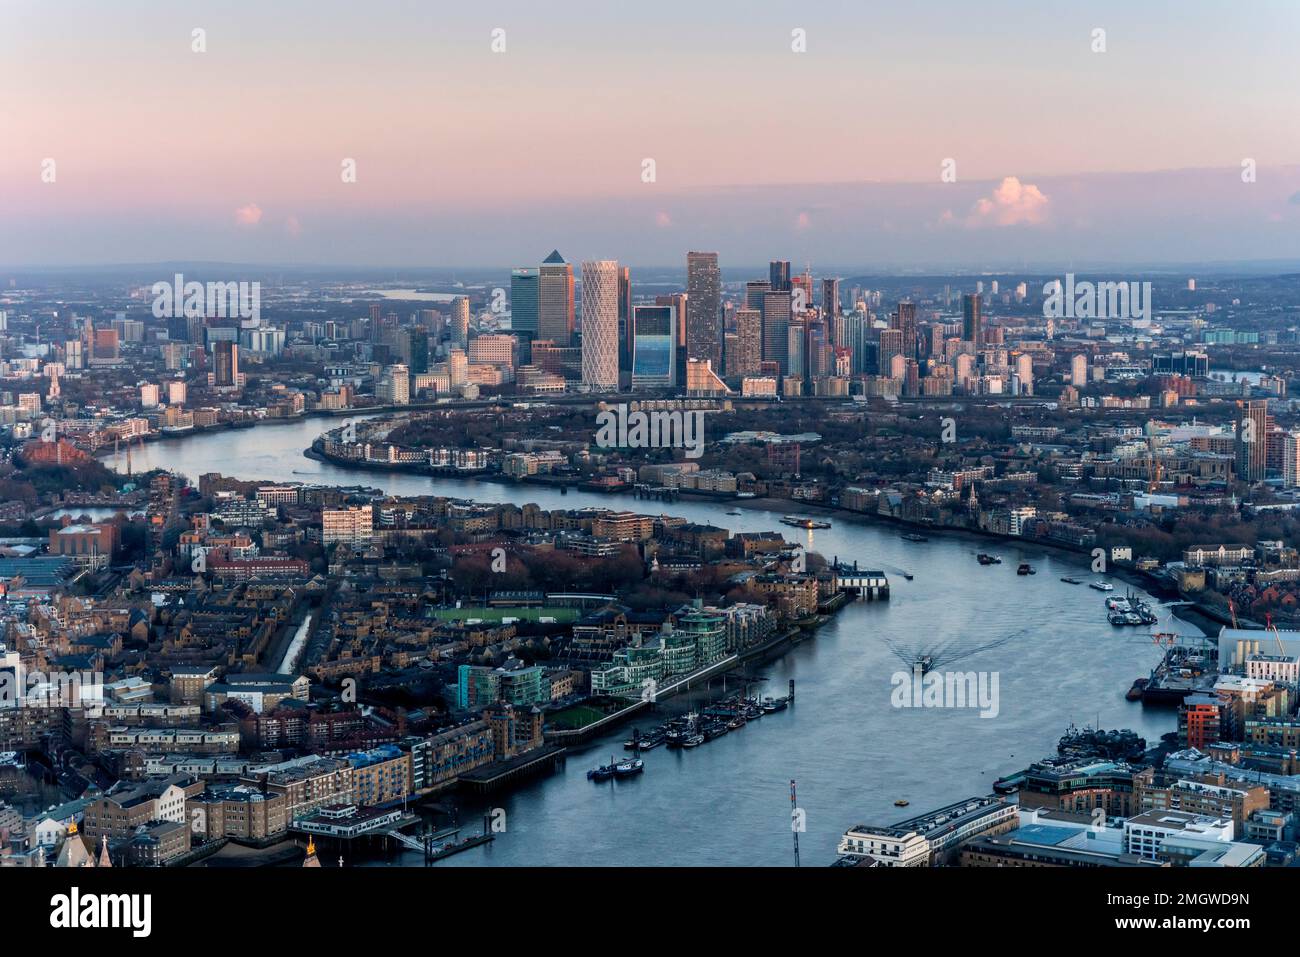 A View Of The River Thames and Canary Wharf at Sunset from The Shard, London, UK. Stock Photo